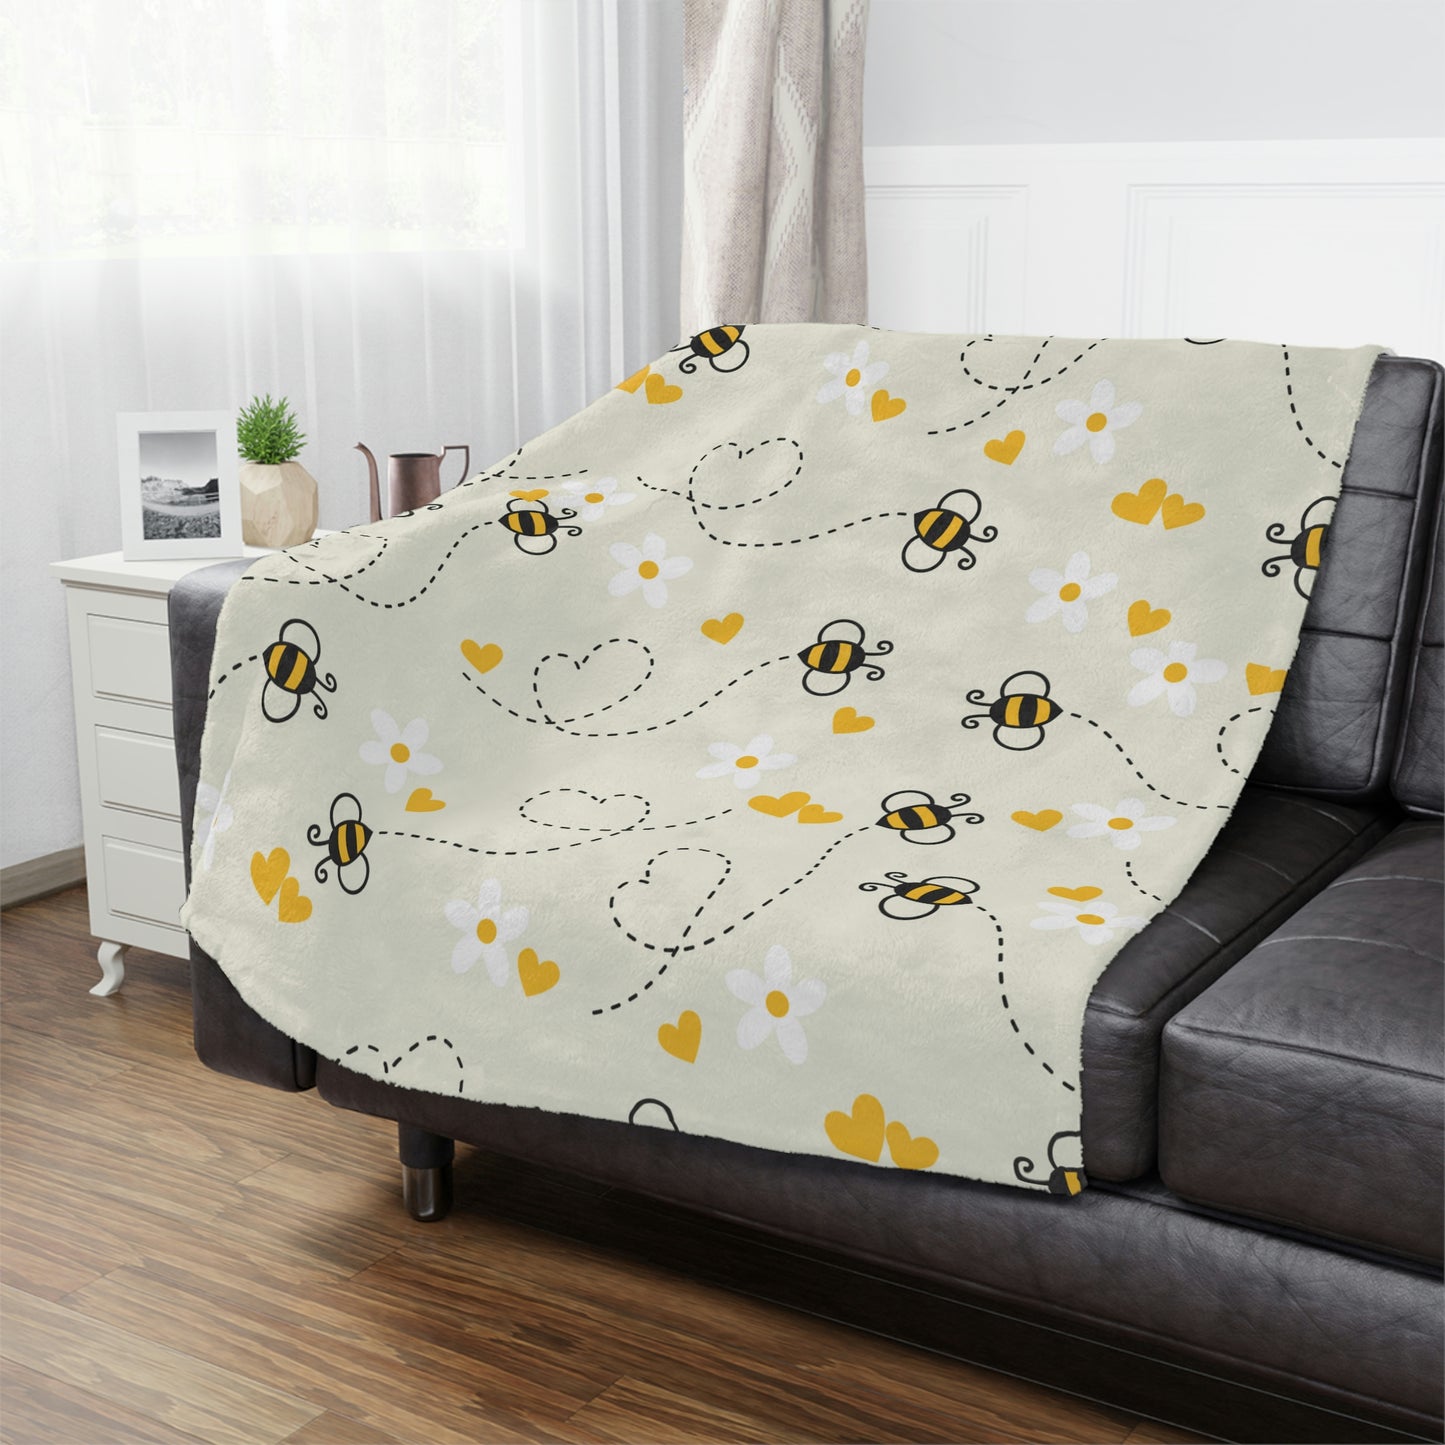 honey bee and daisy blanket in yellow and black